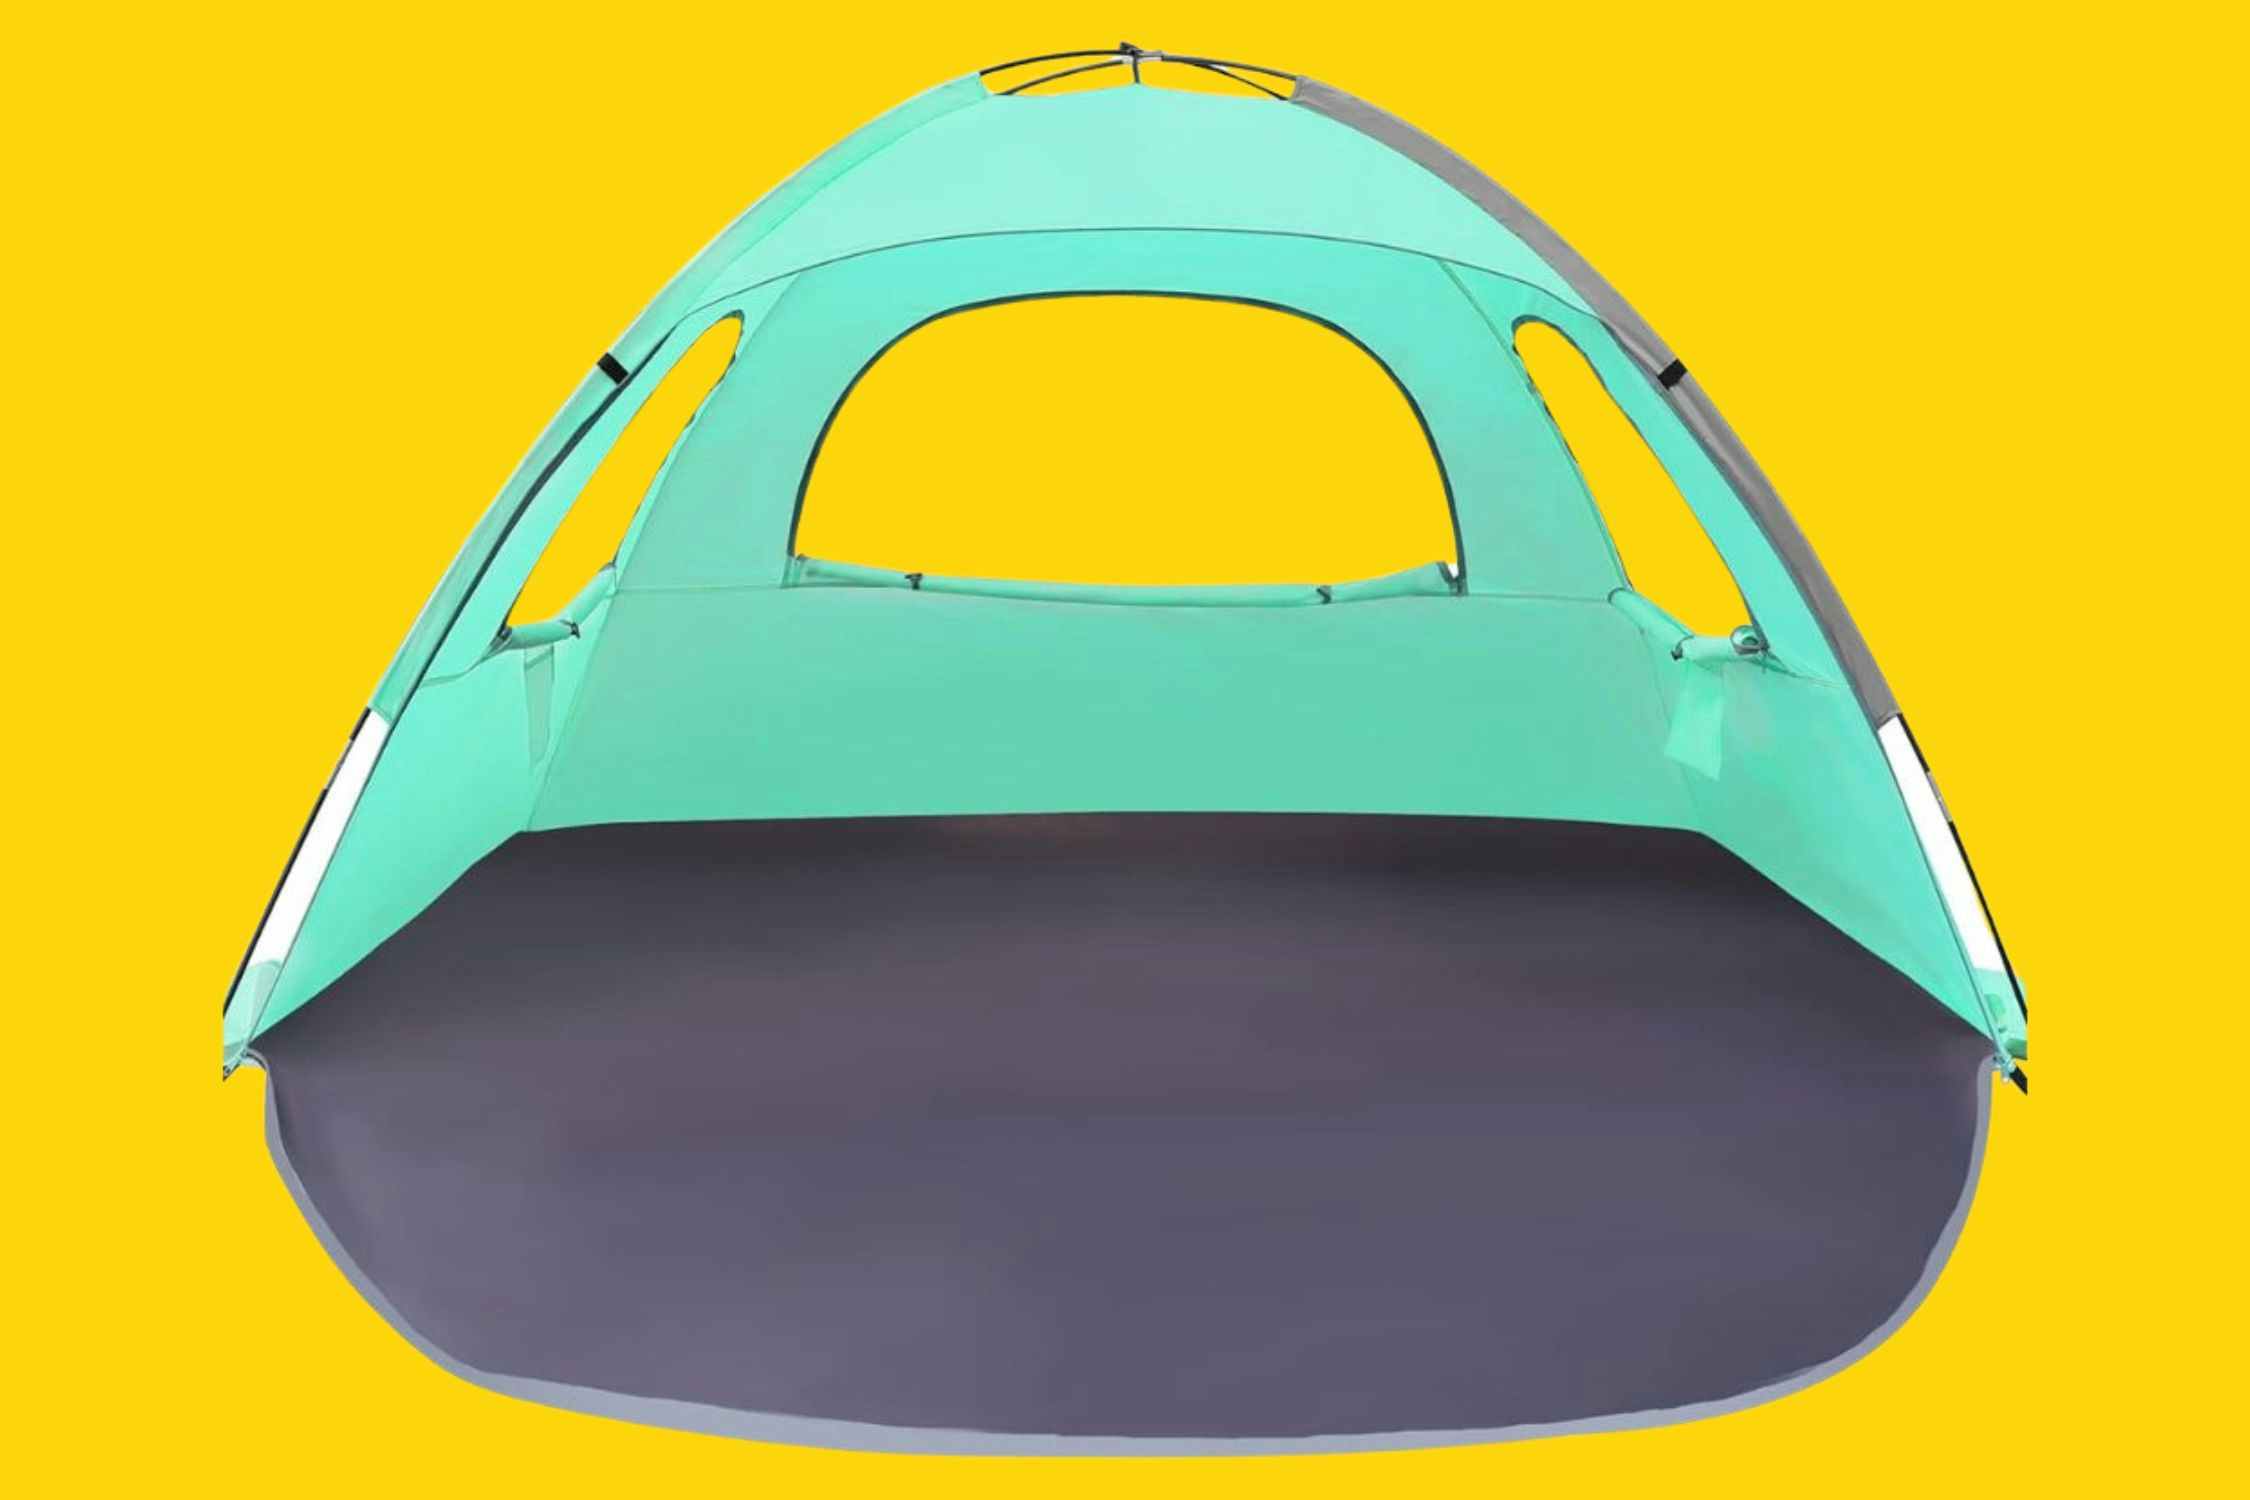 Portable 3-Person Beach Tent, Only $25 on Amazon (Reg. $50)